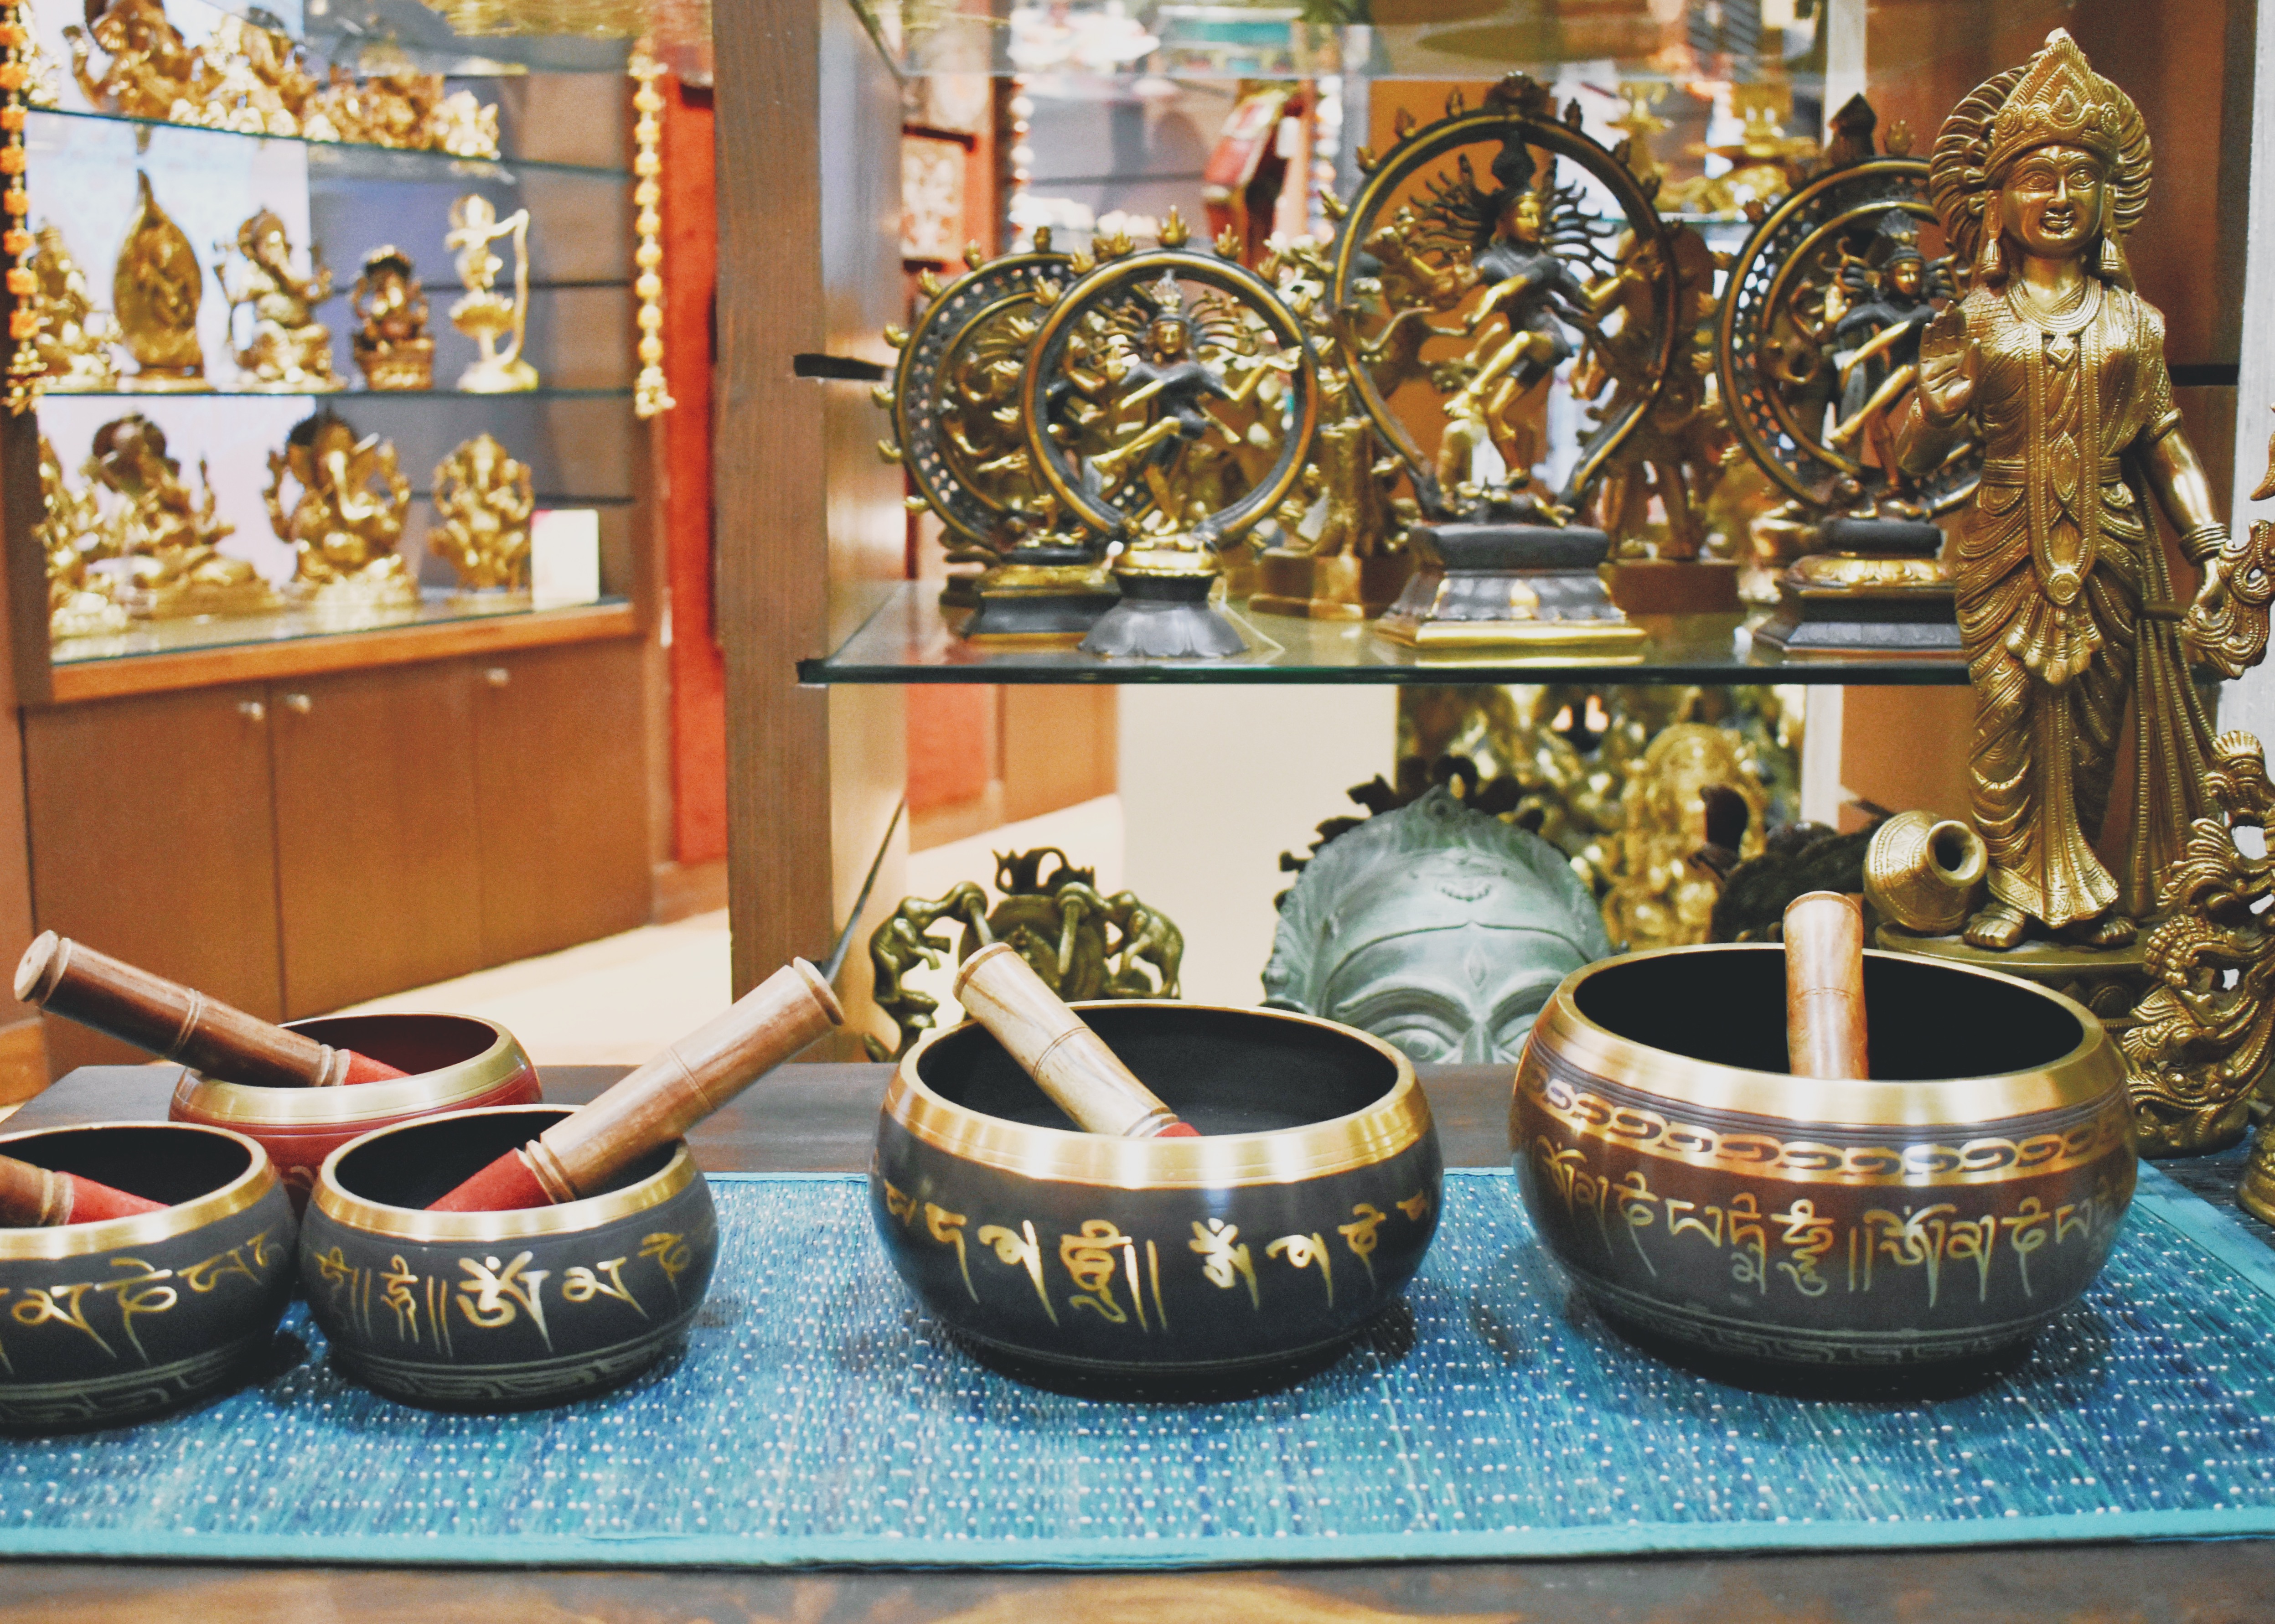 Intricately carved bowls